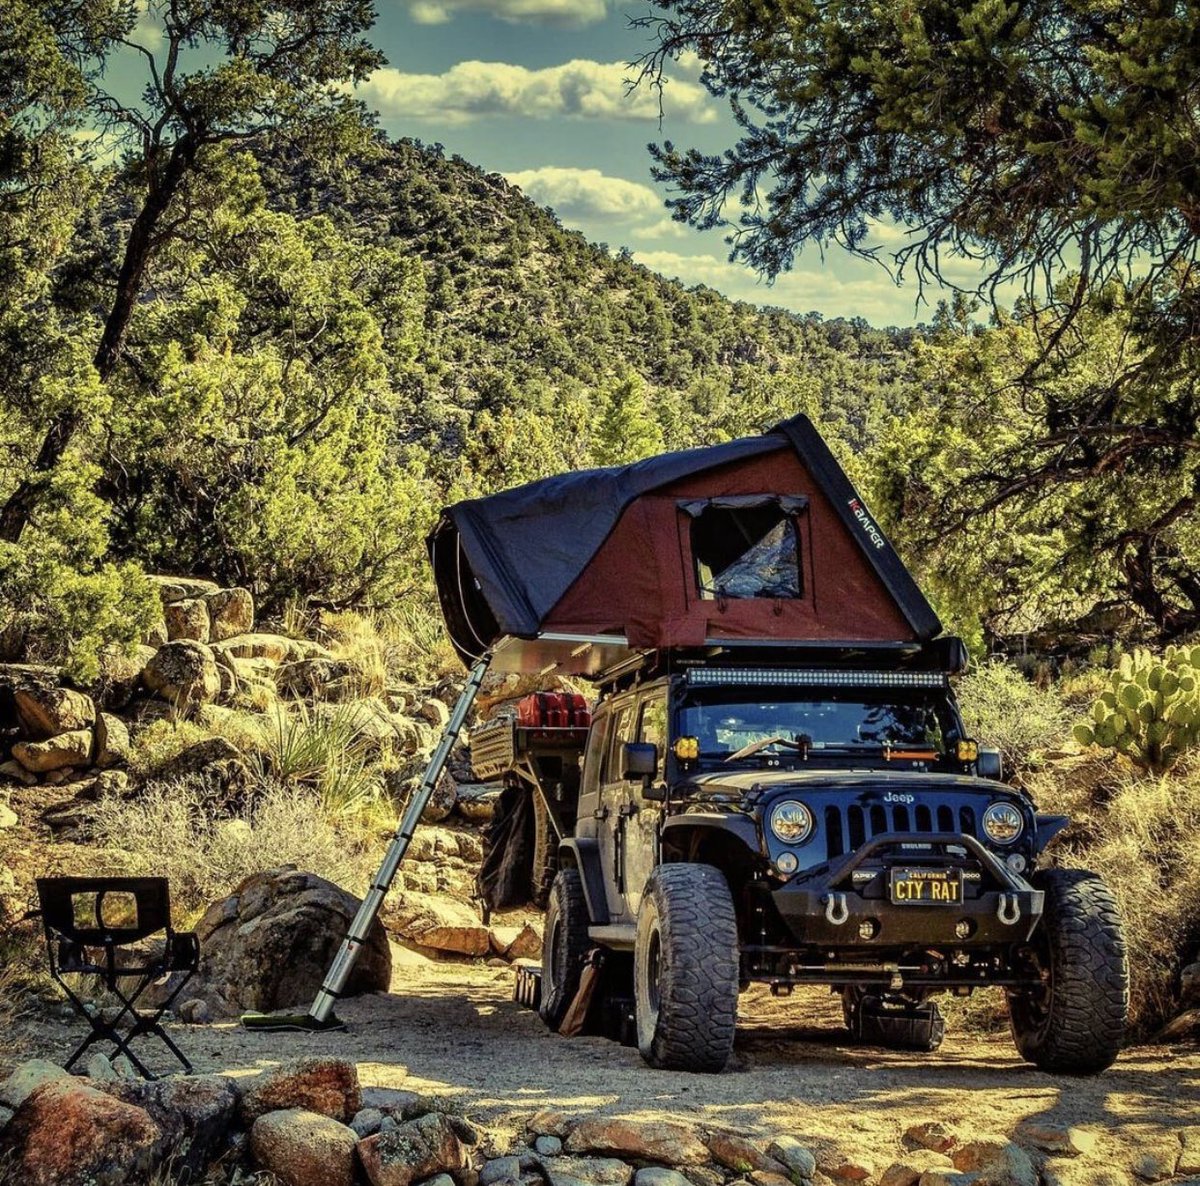 The weekend is here it’s up to you how you want to play. @cheech_tim @ErinsDemonJeep @rpx53 @LakeHuronGirl @mpmckale @29kyle29 @emssherill @TJJeep1 @JosephPallotta @BIGROBNYPDPIZZA @cookies1961 @becky2175 @Scooby_Barkley @H8Roads